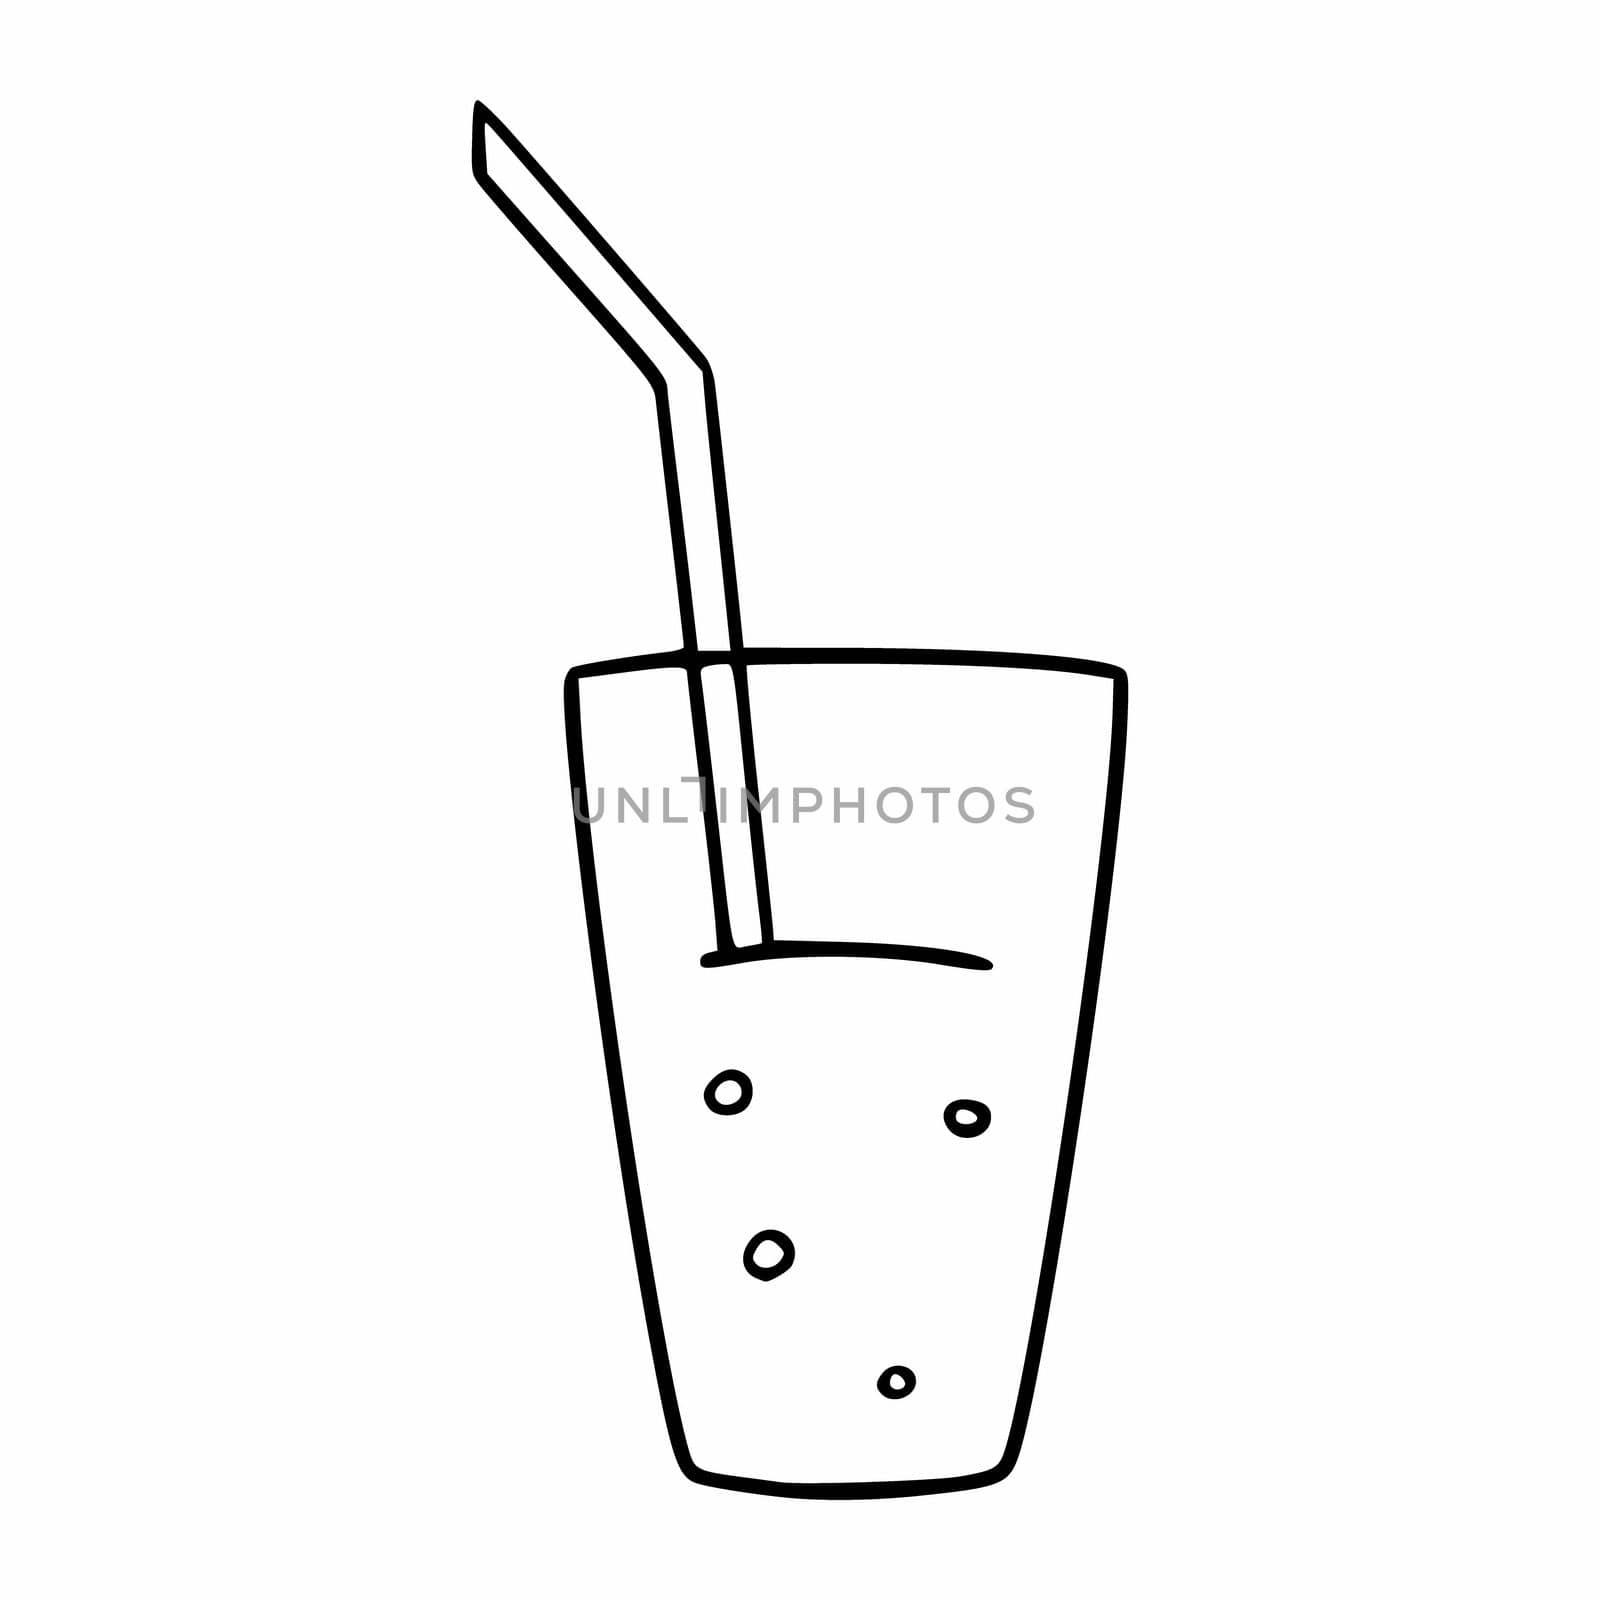 Cocktail with a straw. A cold drink in a glass. Vector icon in doodle style. by polinka_art